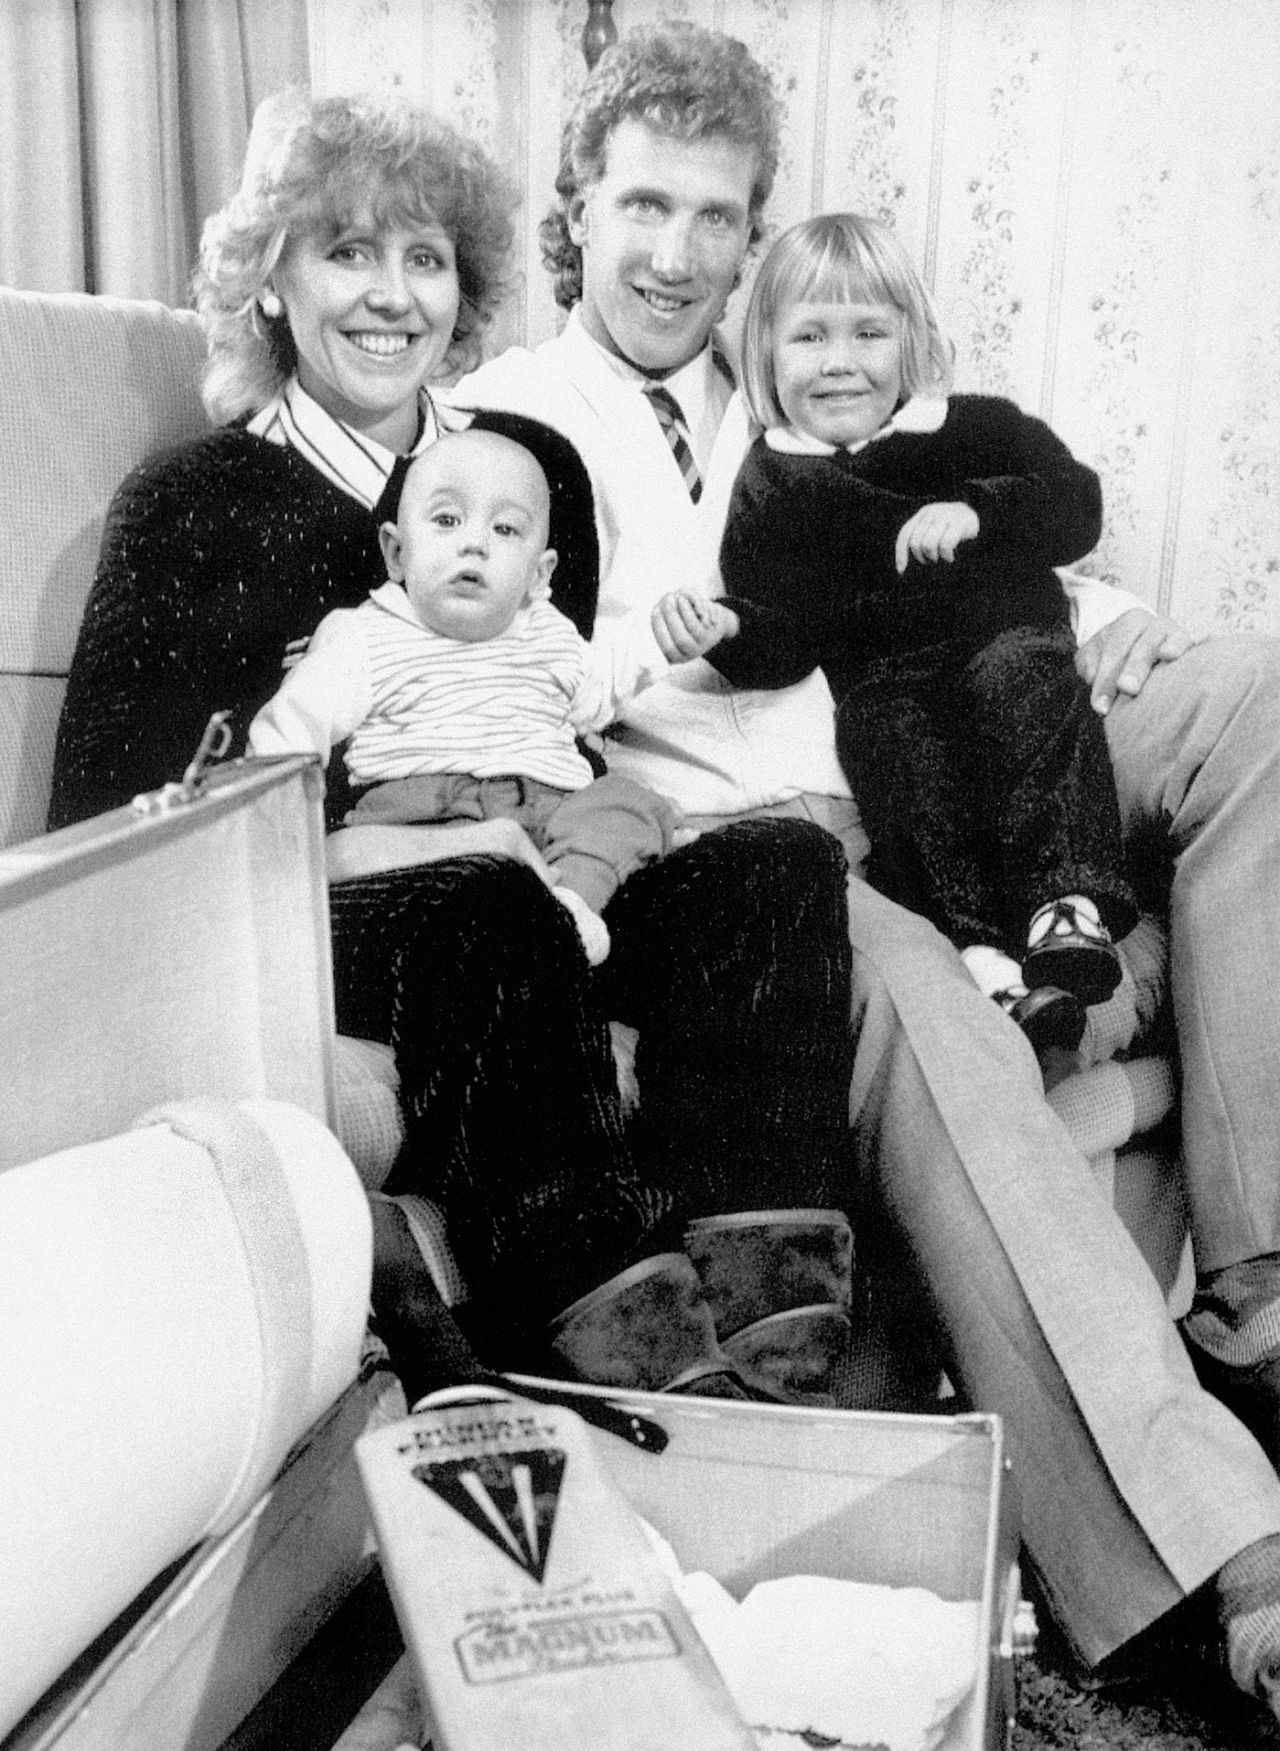 Chris Broad with his wife Carole and his children Stuart (left) and Gemma, February 9, 1987